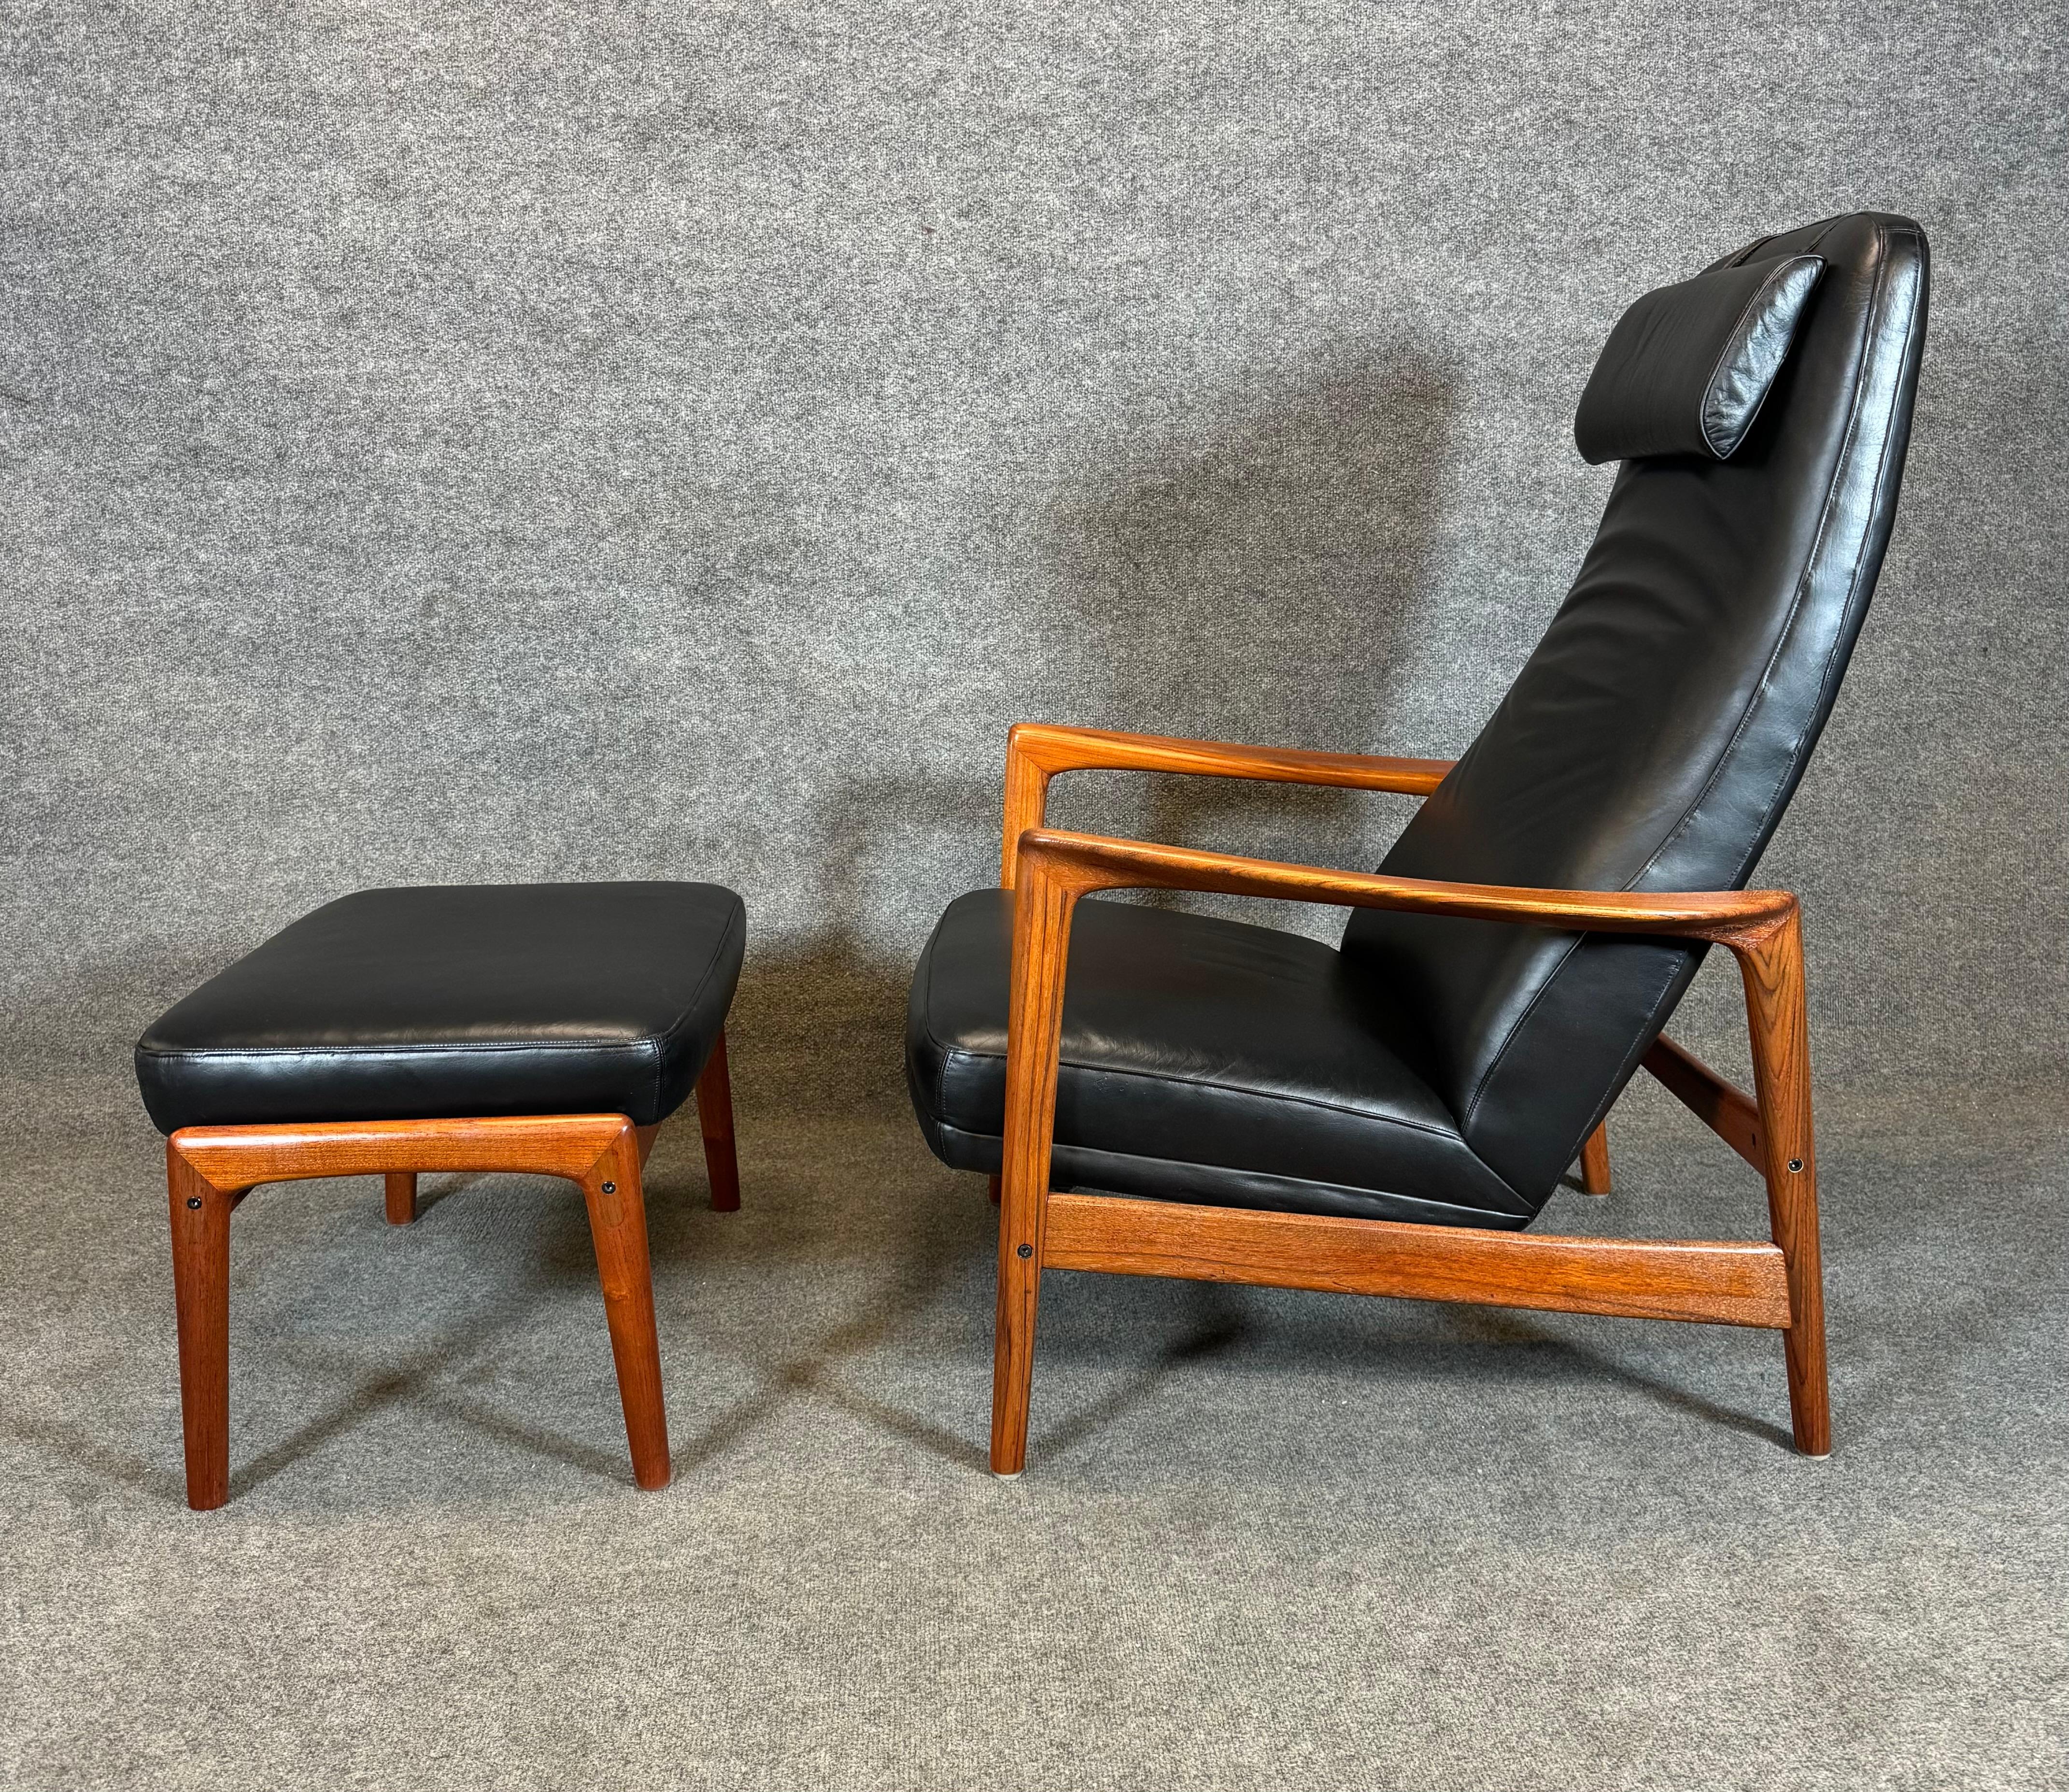 Here is a beautiful Scandinavian modern lounge chair and its ottoman in teak and leather designed by Folke Ohlsson and manufactured by DUX in Sweden ion the 1960's.
This comfortable set, recently imported from Europe to California before its